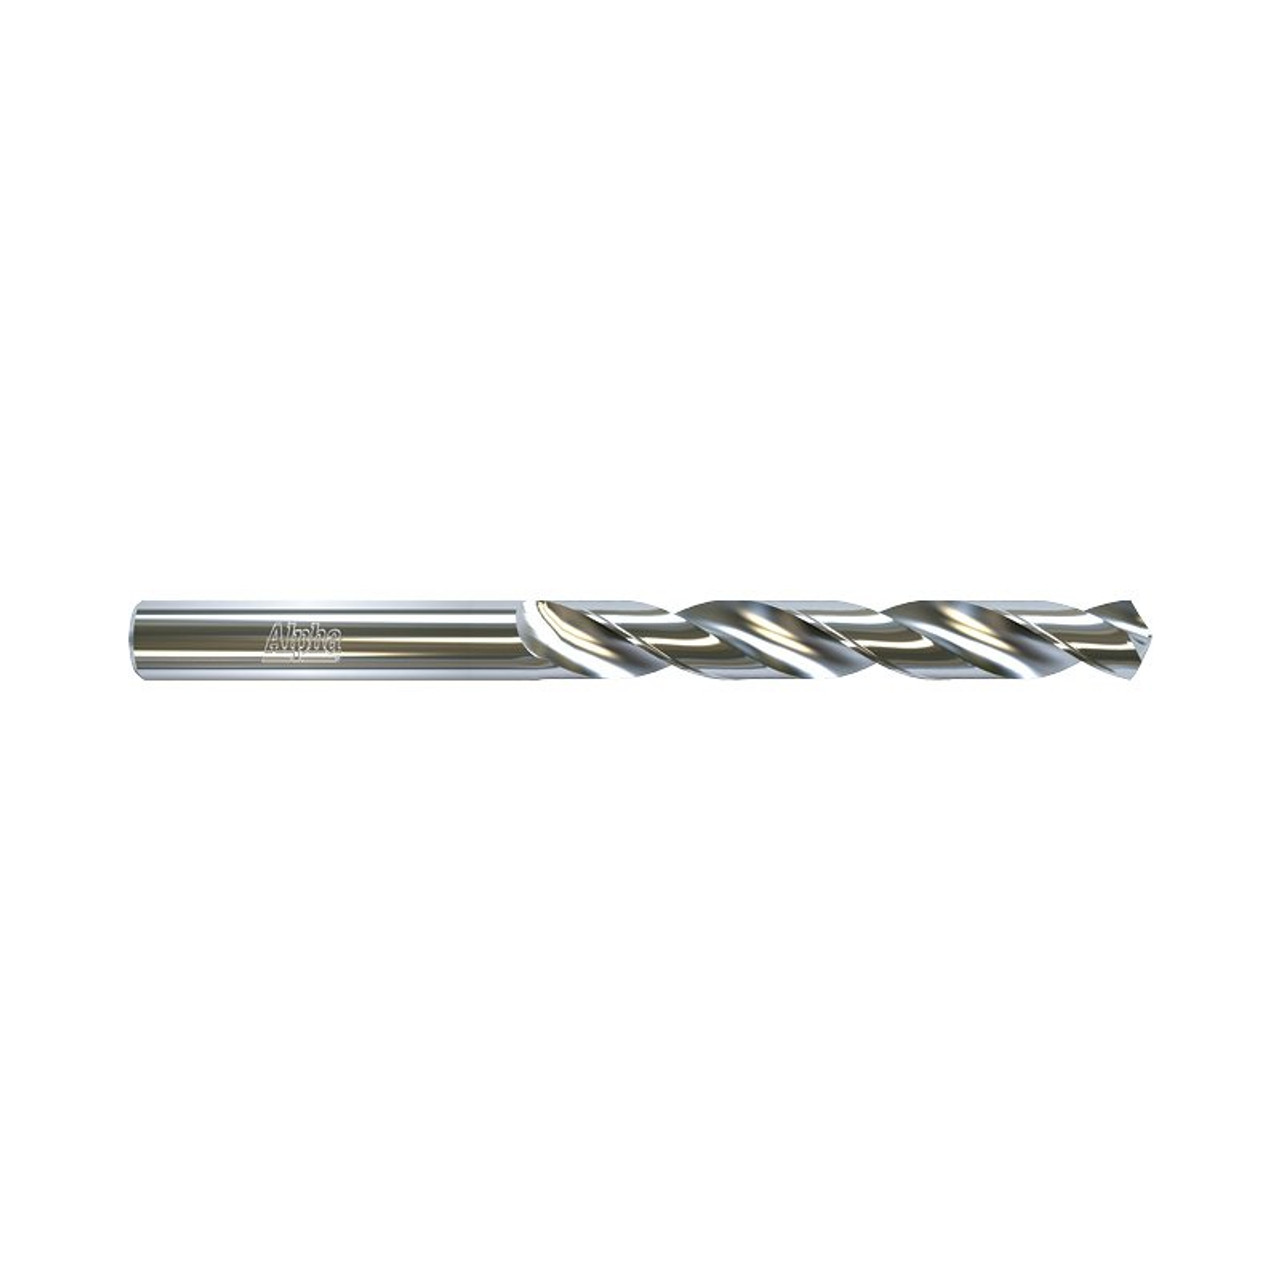 12.0Mm Jobber Drill Bit Carded - Silver Series